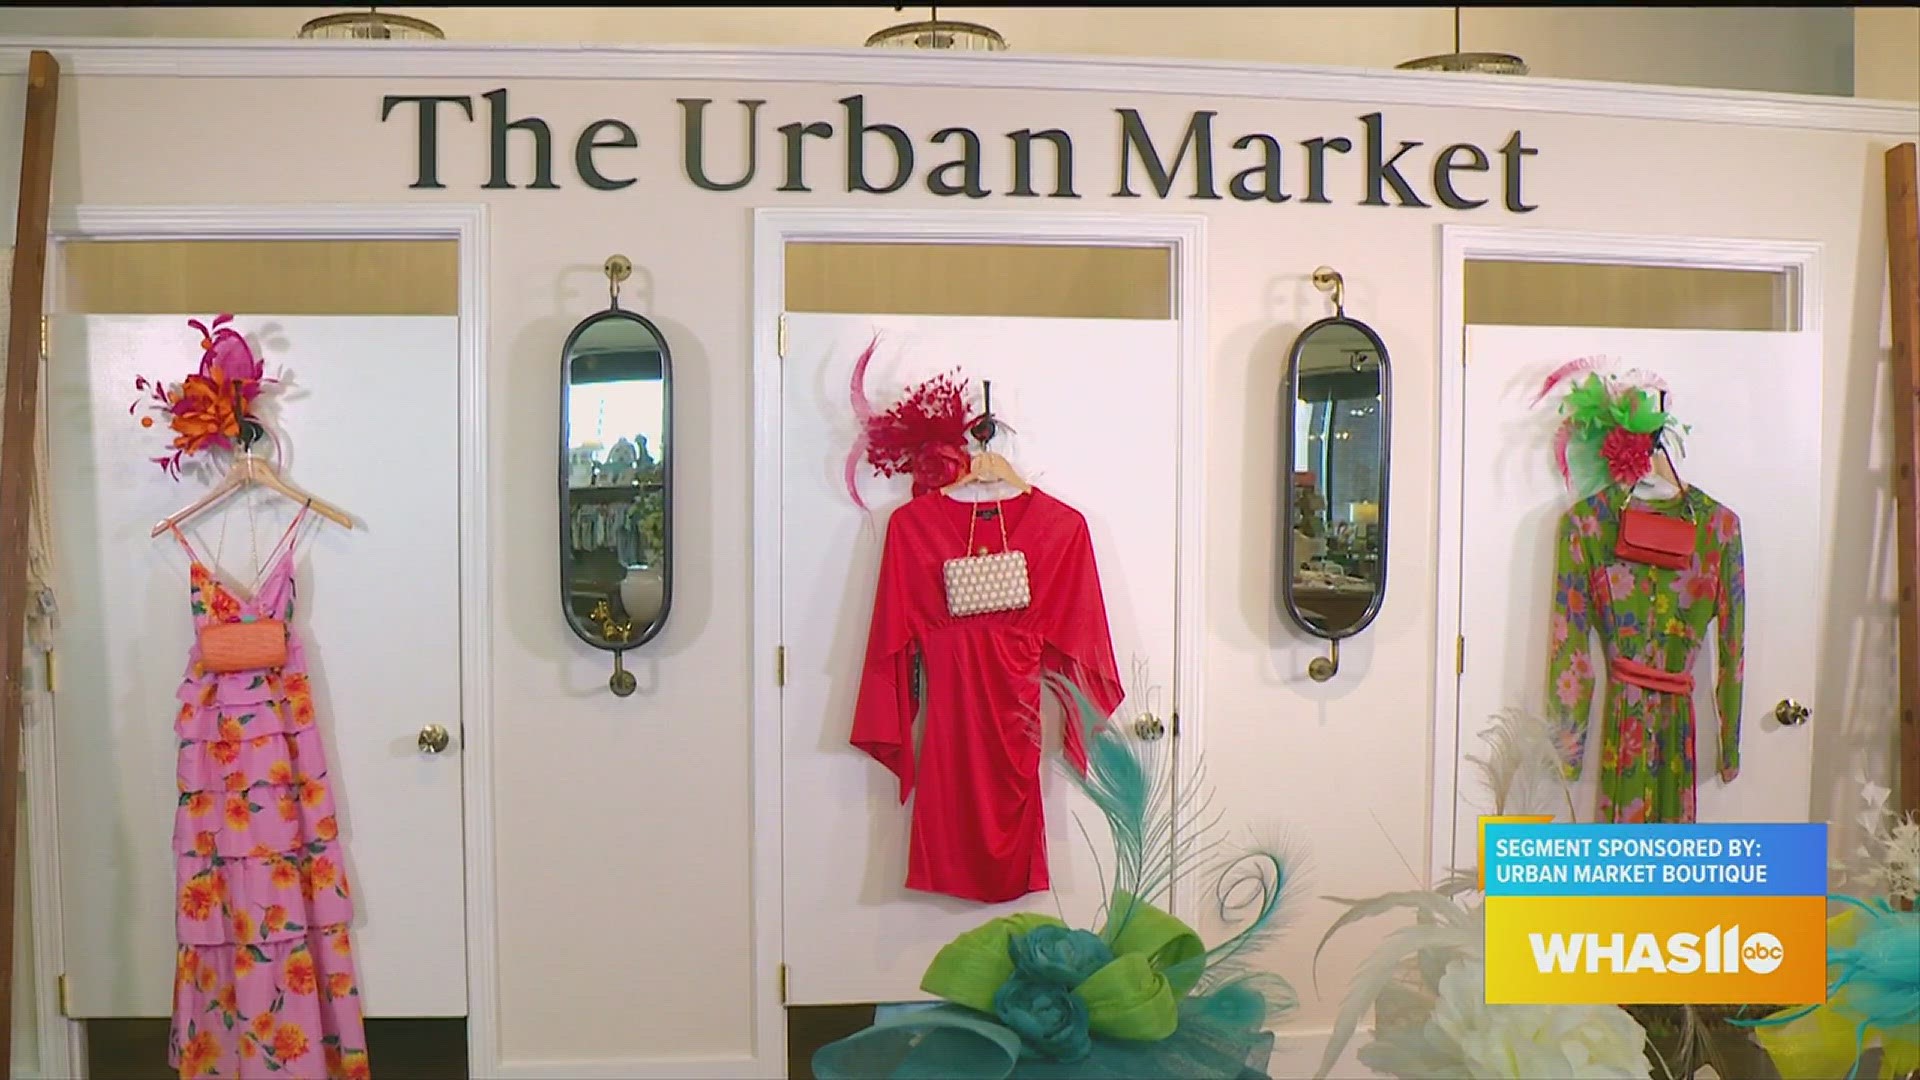 If you're still searching for that perfect Derby outfit, Urban Market Boutique has you covered!